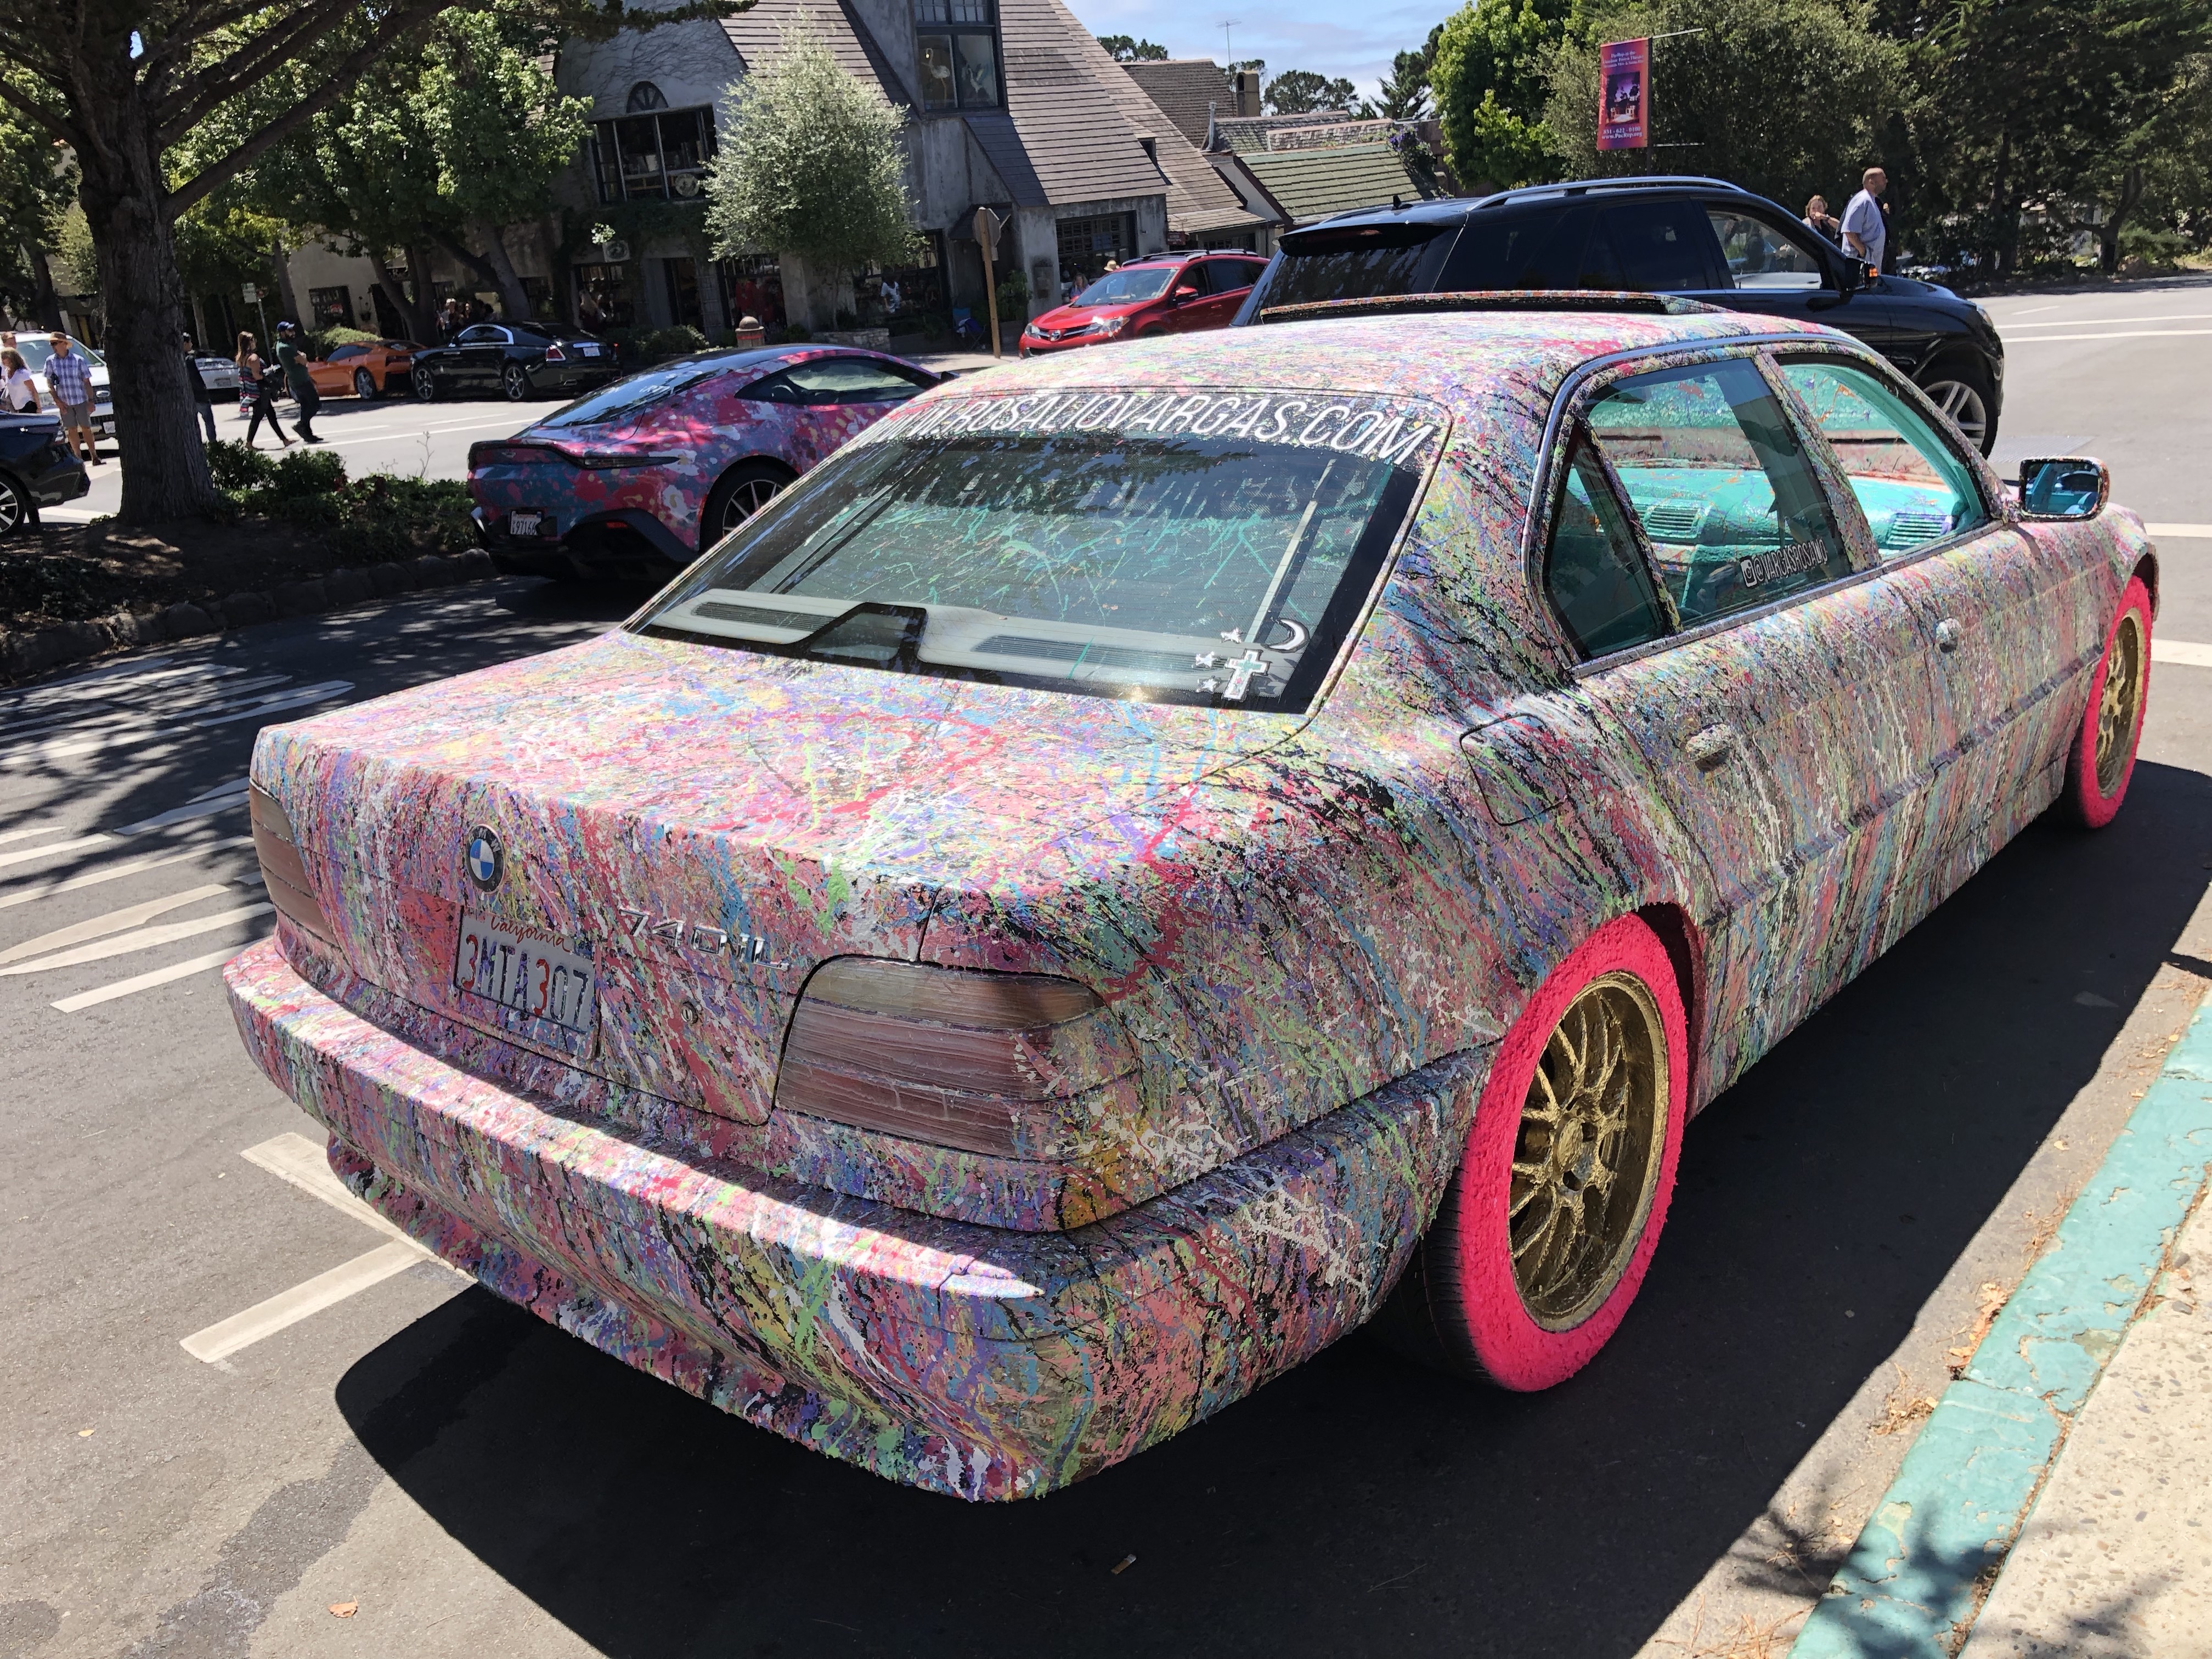 The most disgustingly-decorated BMW I've ever seen